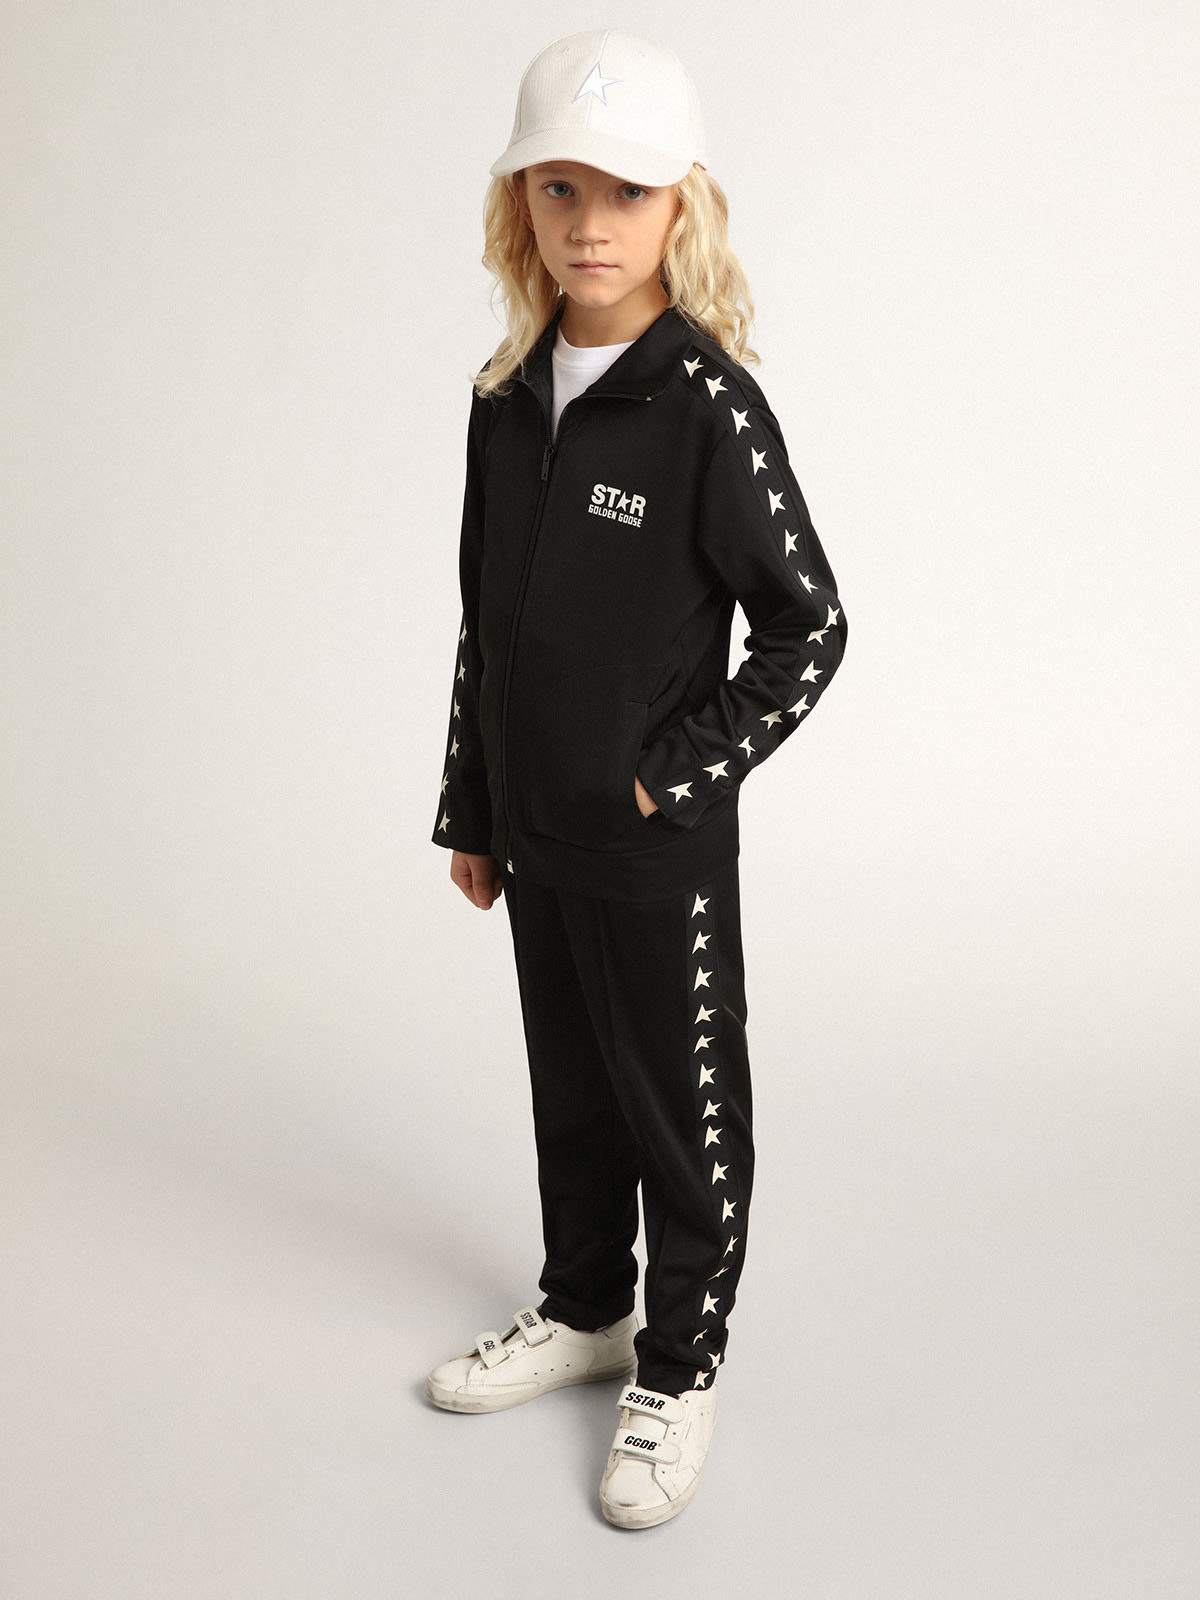 Golden Goose - Black Star Collection zipped sweatshirt with contrasting white stars in 